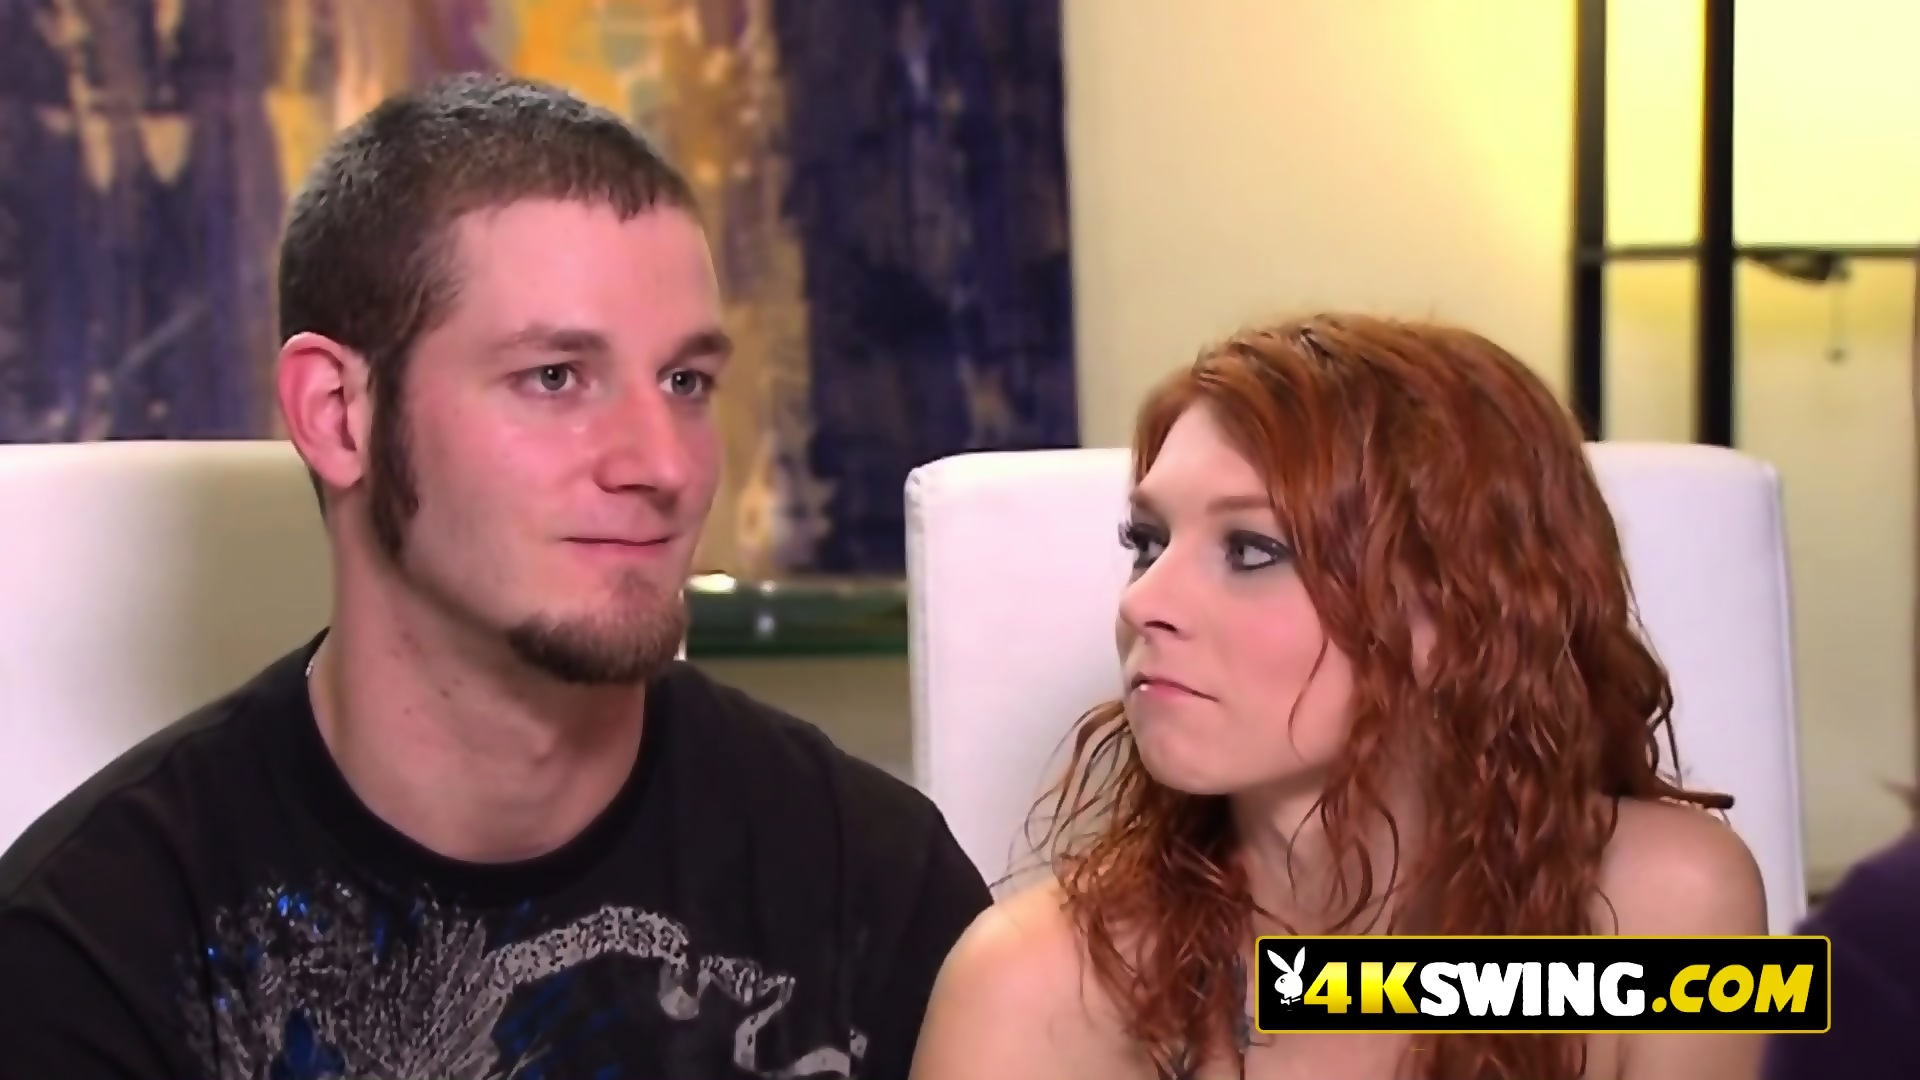 Horny Redhead Convince Her Husband To Live The Swinger Experience In A Reality TV Show Just For Fun.